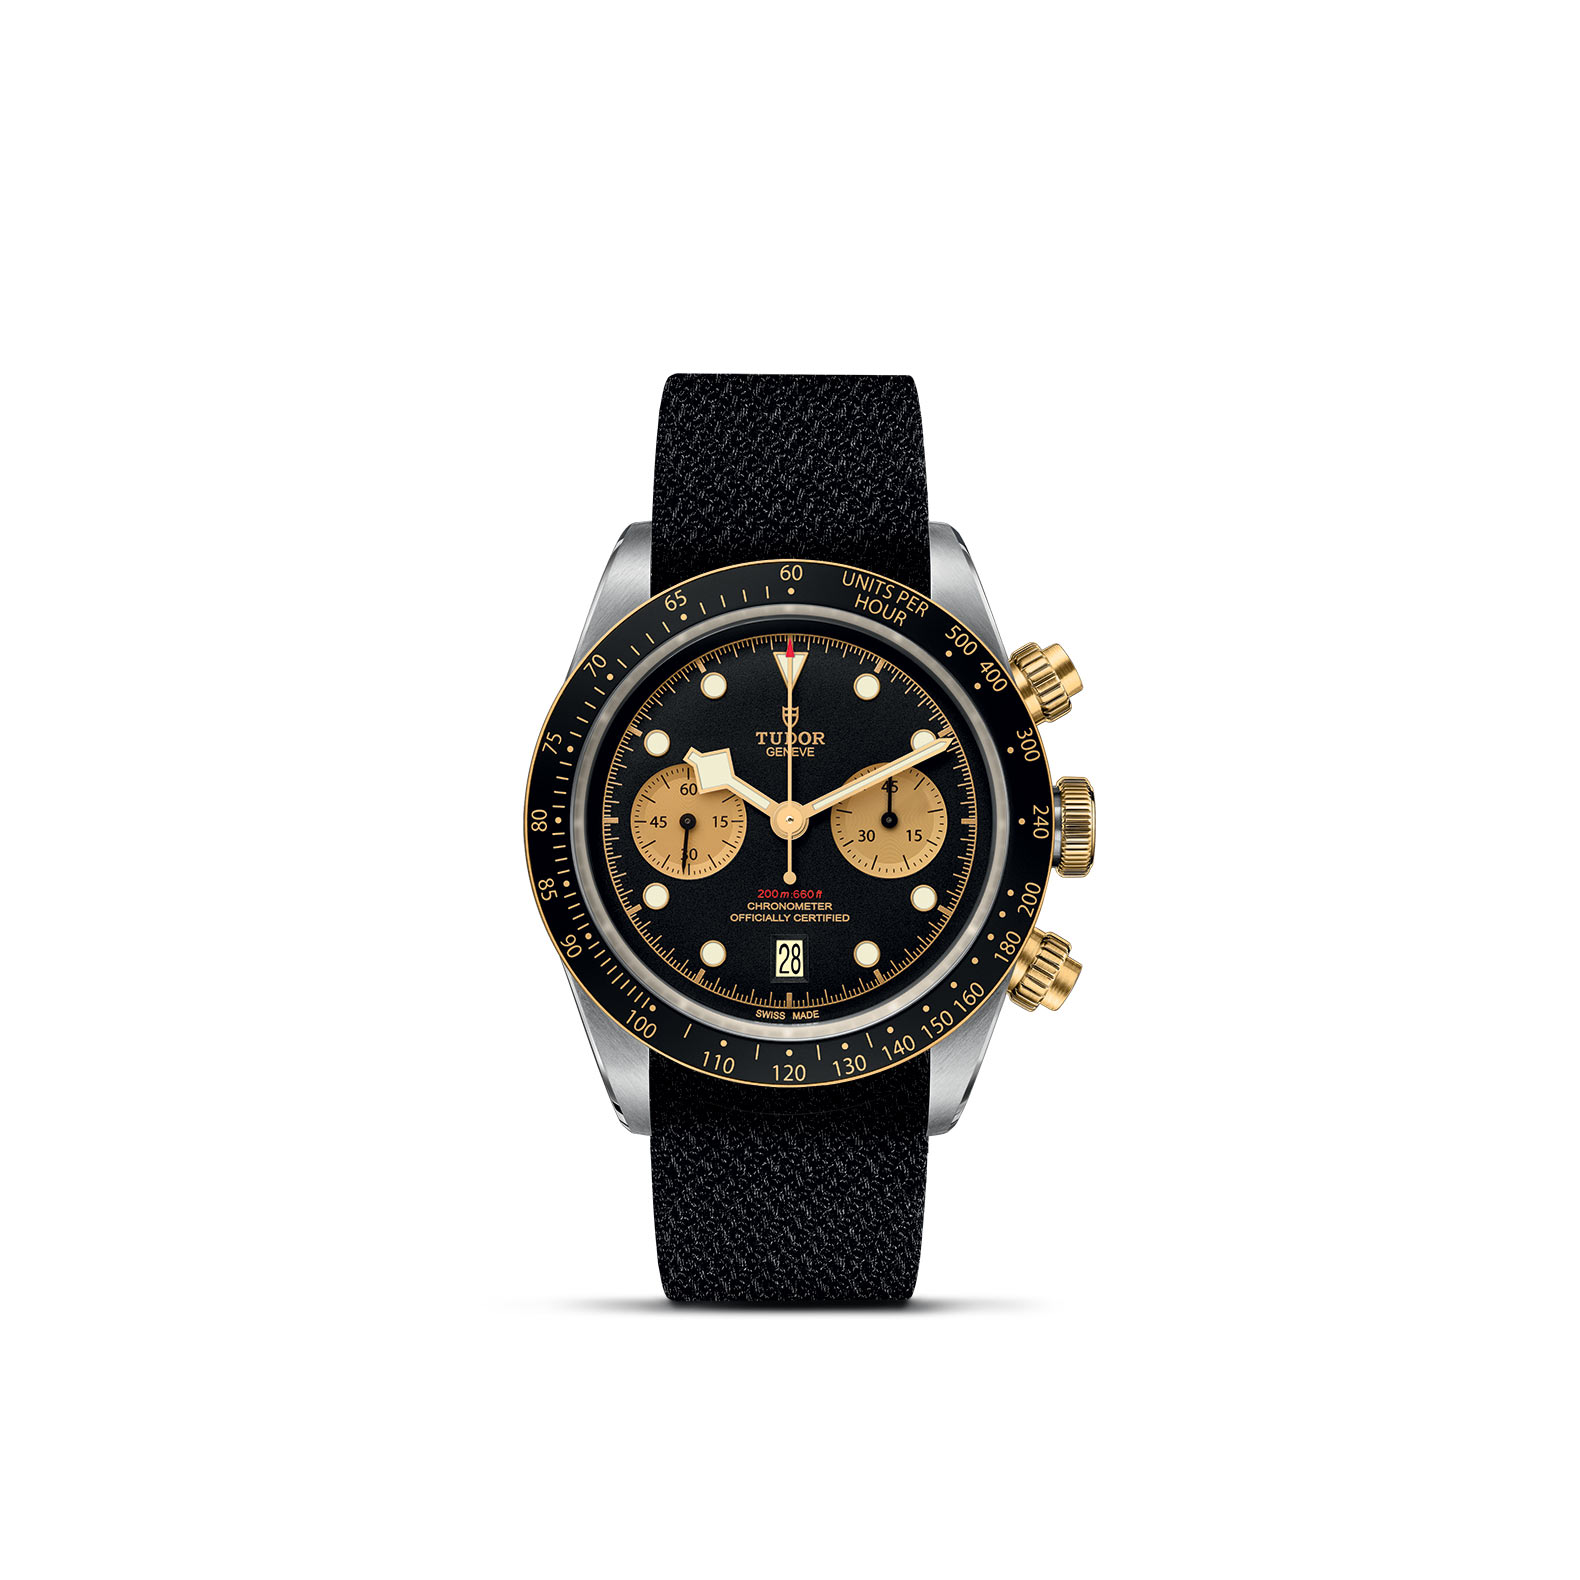 TUDOR BLACK BAY CHRONO standing upright, highlighting its classic design against a white background.